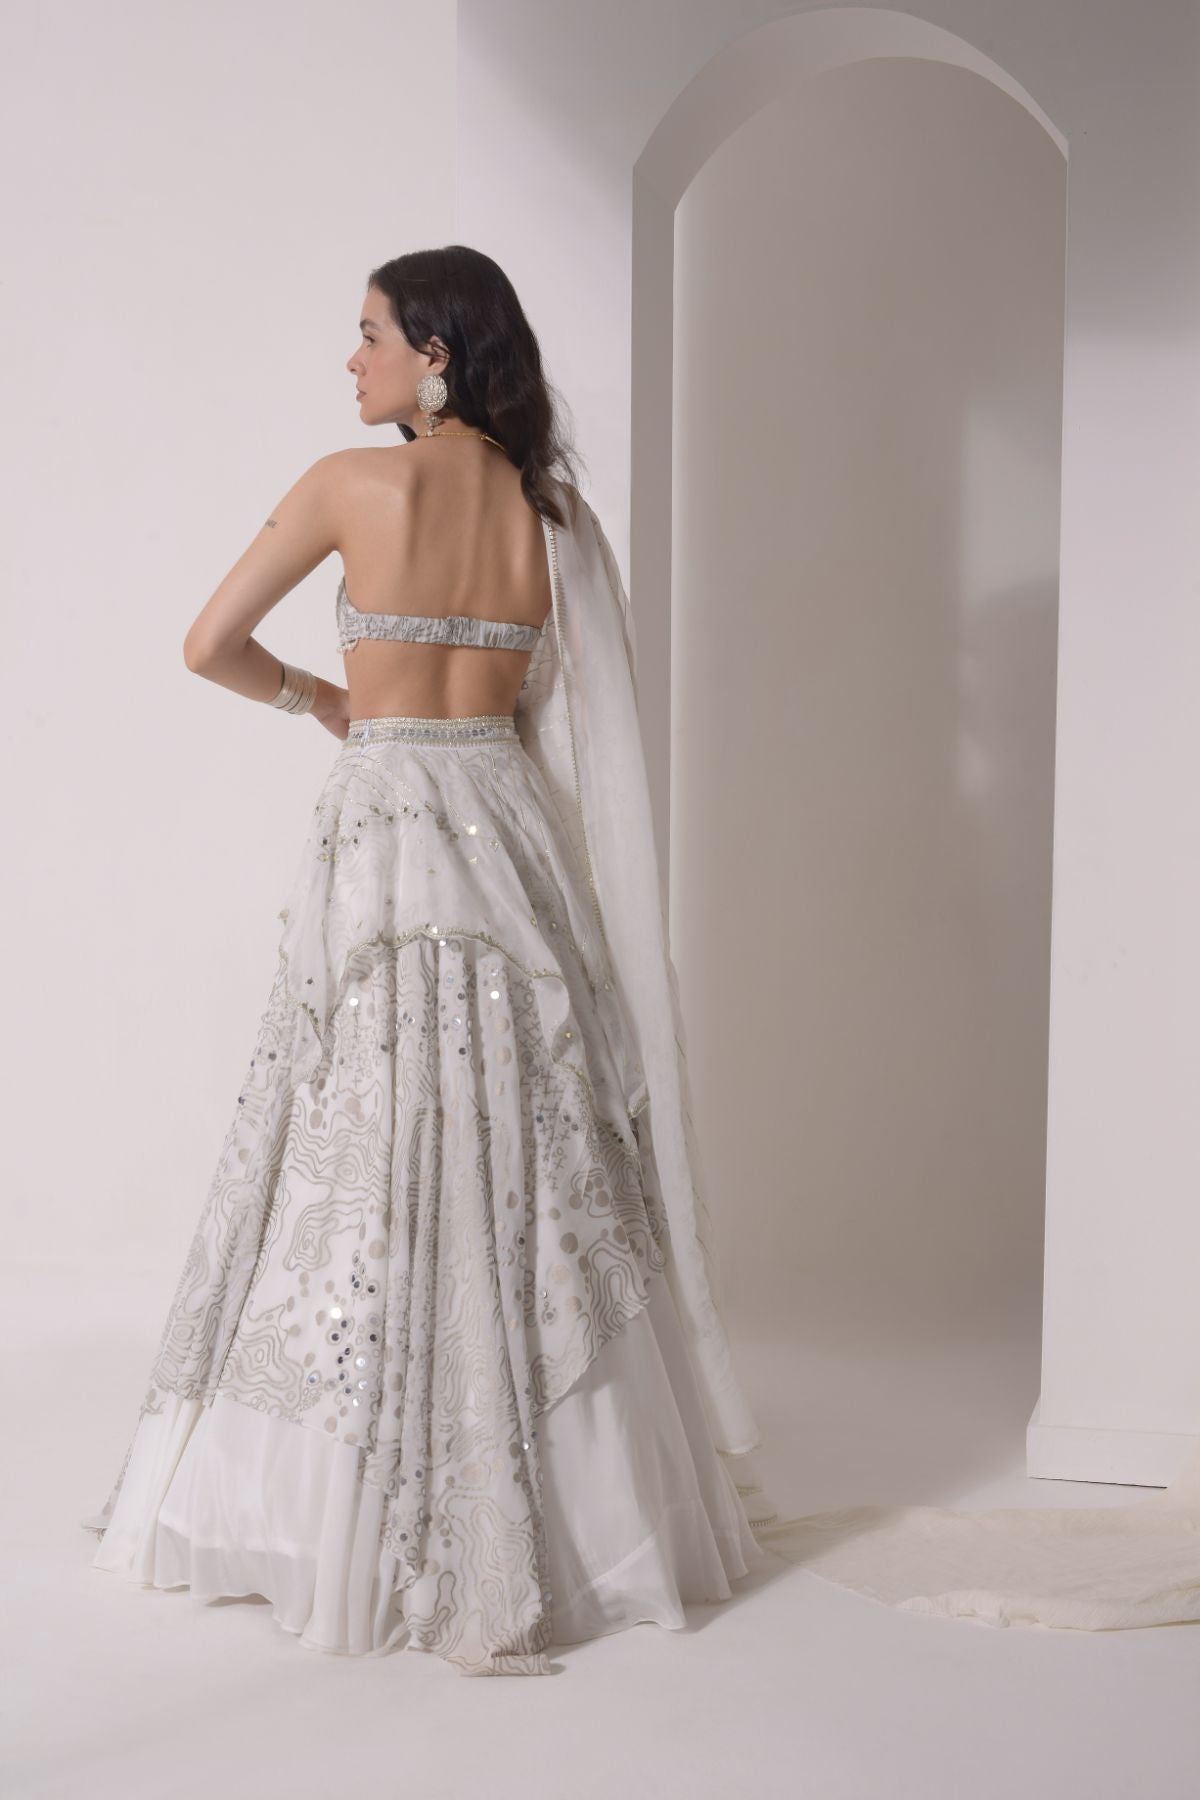 Asymmetrical layered lehenga with foil printed ruched bustier and dupatta